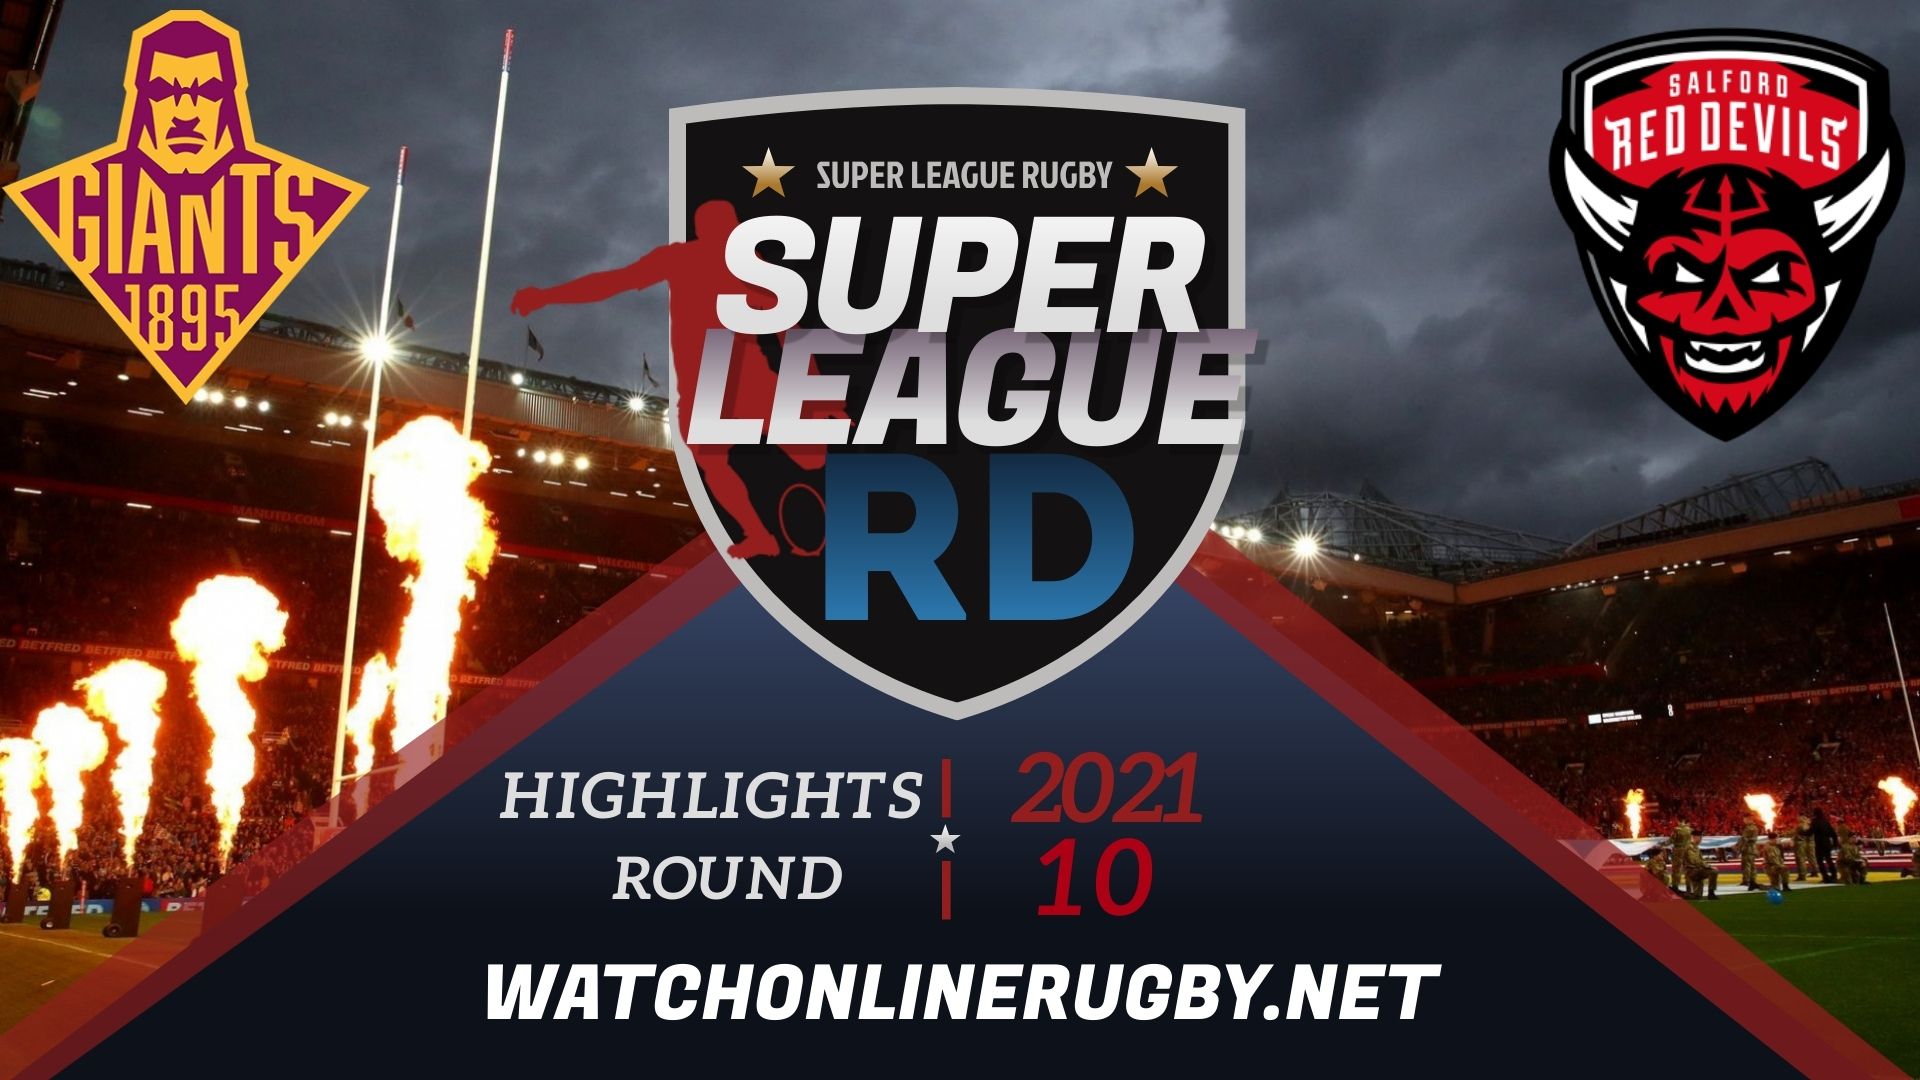 Huddersfield Giants Vs Salford Red Devils Super League Rugby 2021 RD 10